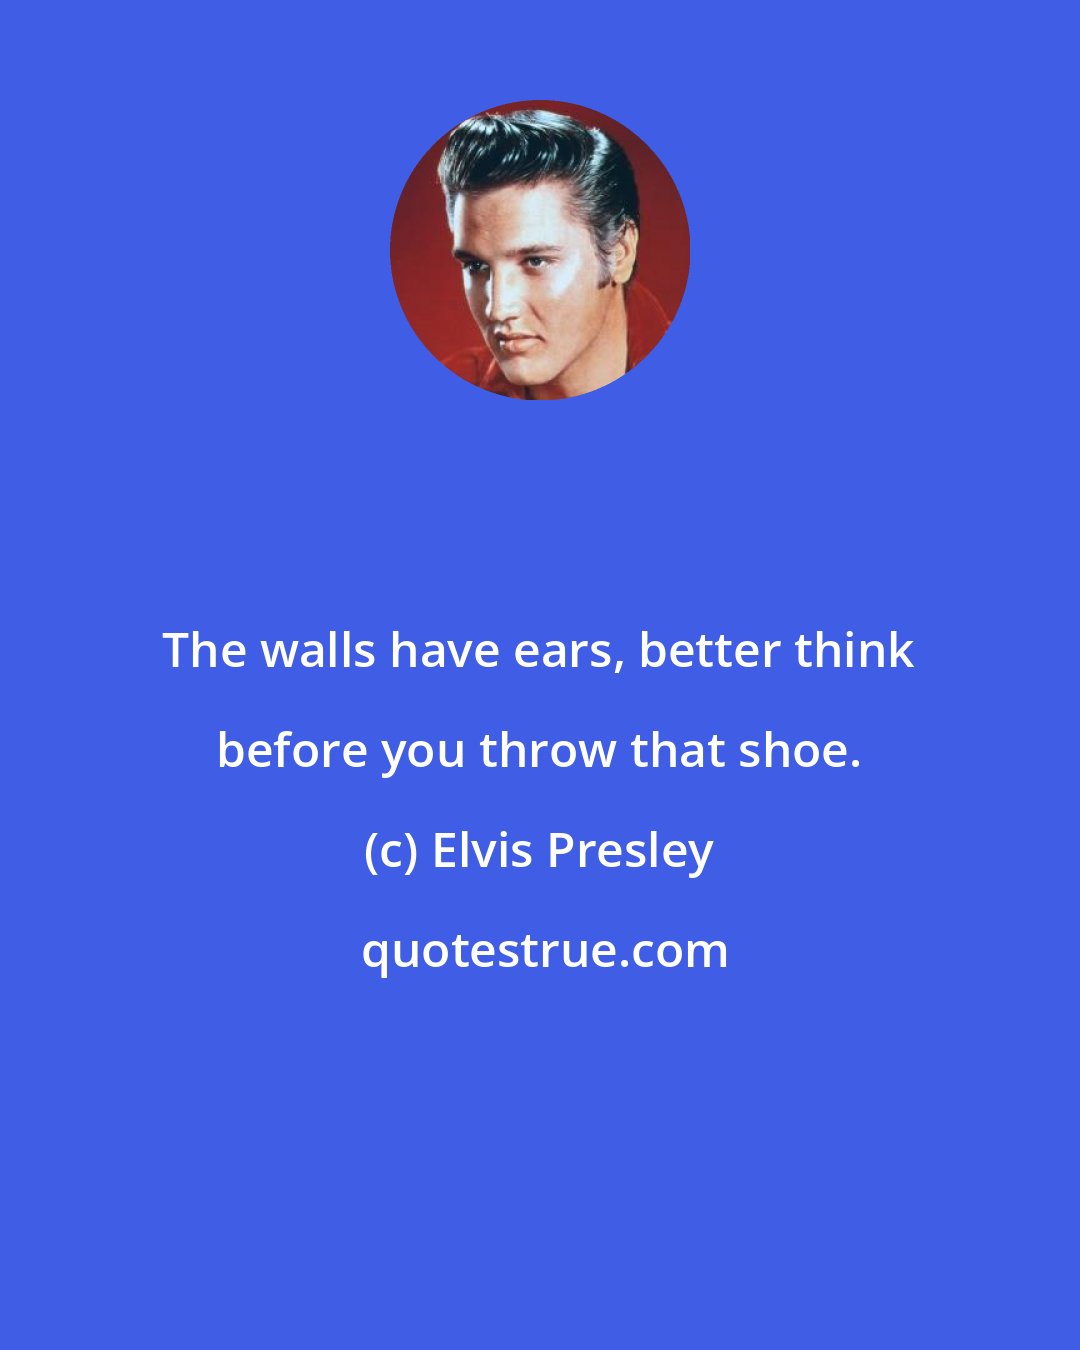 Elvis Presley: The walls have ears, better think before you throw that shoe.